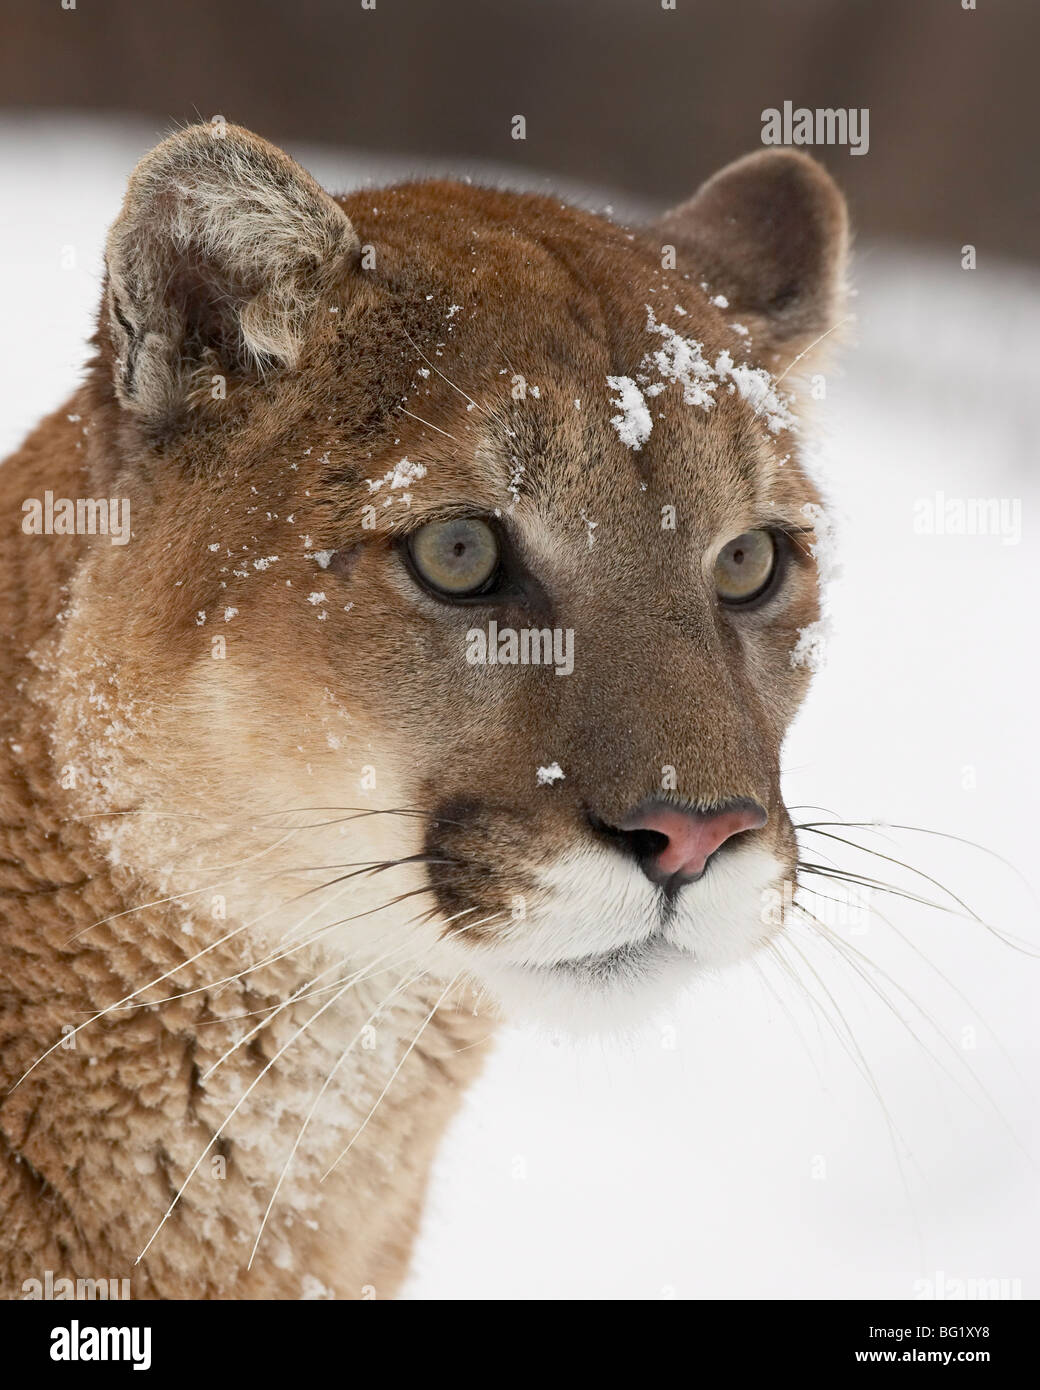 Mountain lion or cougar (Felis concolor) in snow, near Bozeman, Montana, United States of America, North America Stock Photo